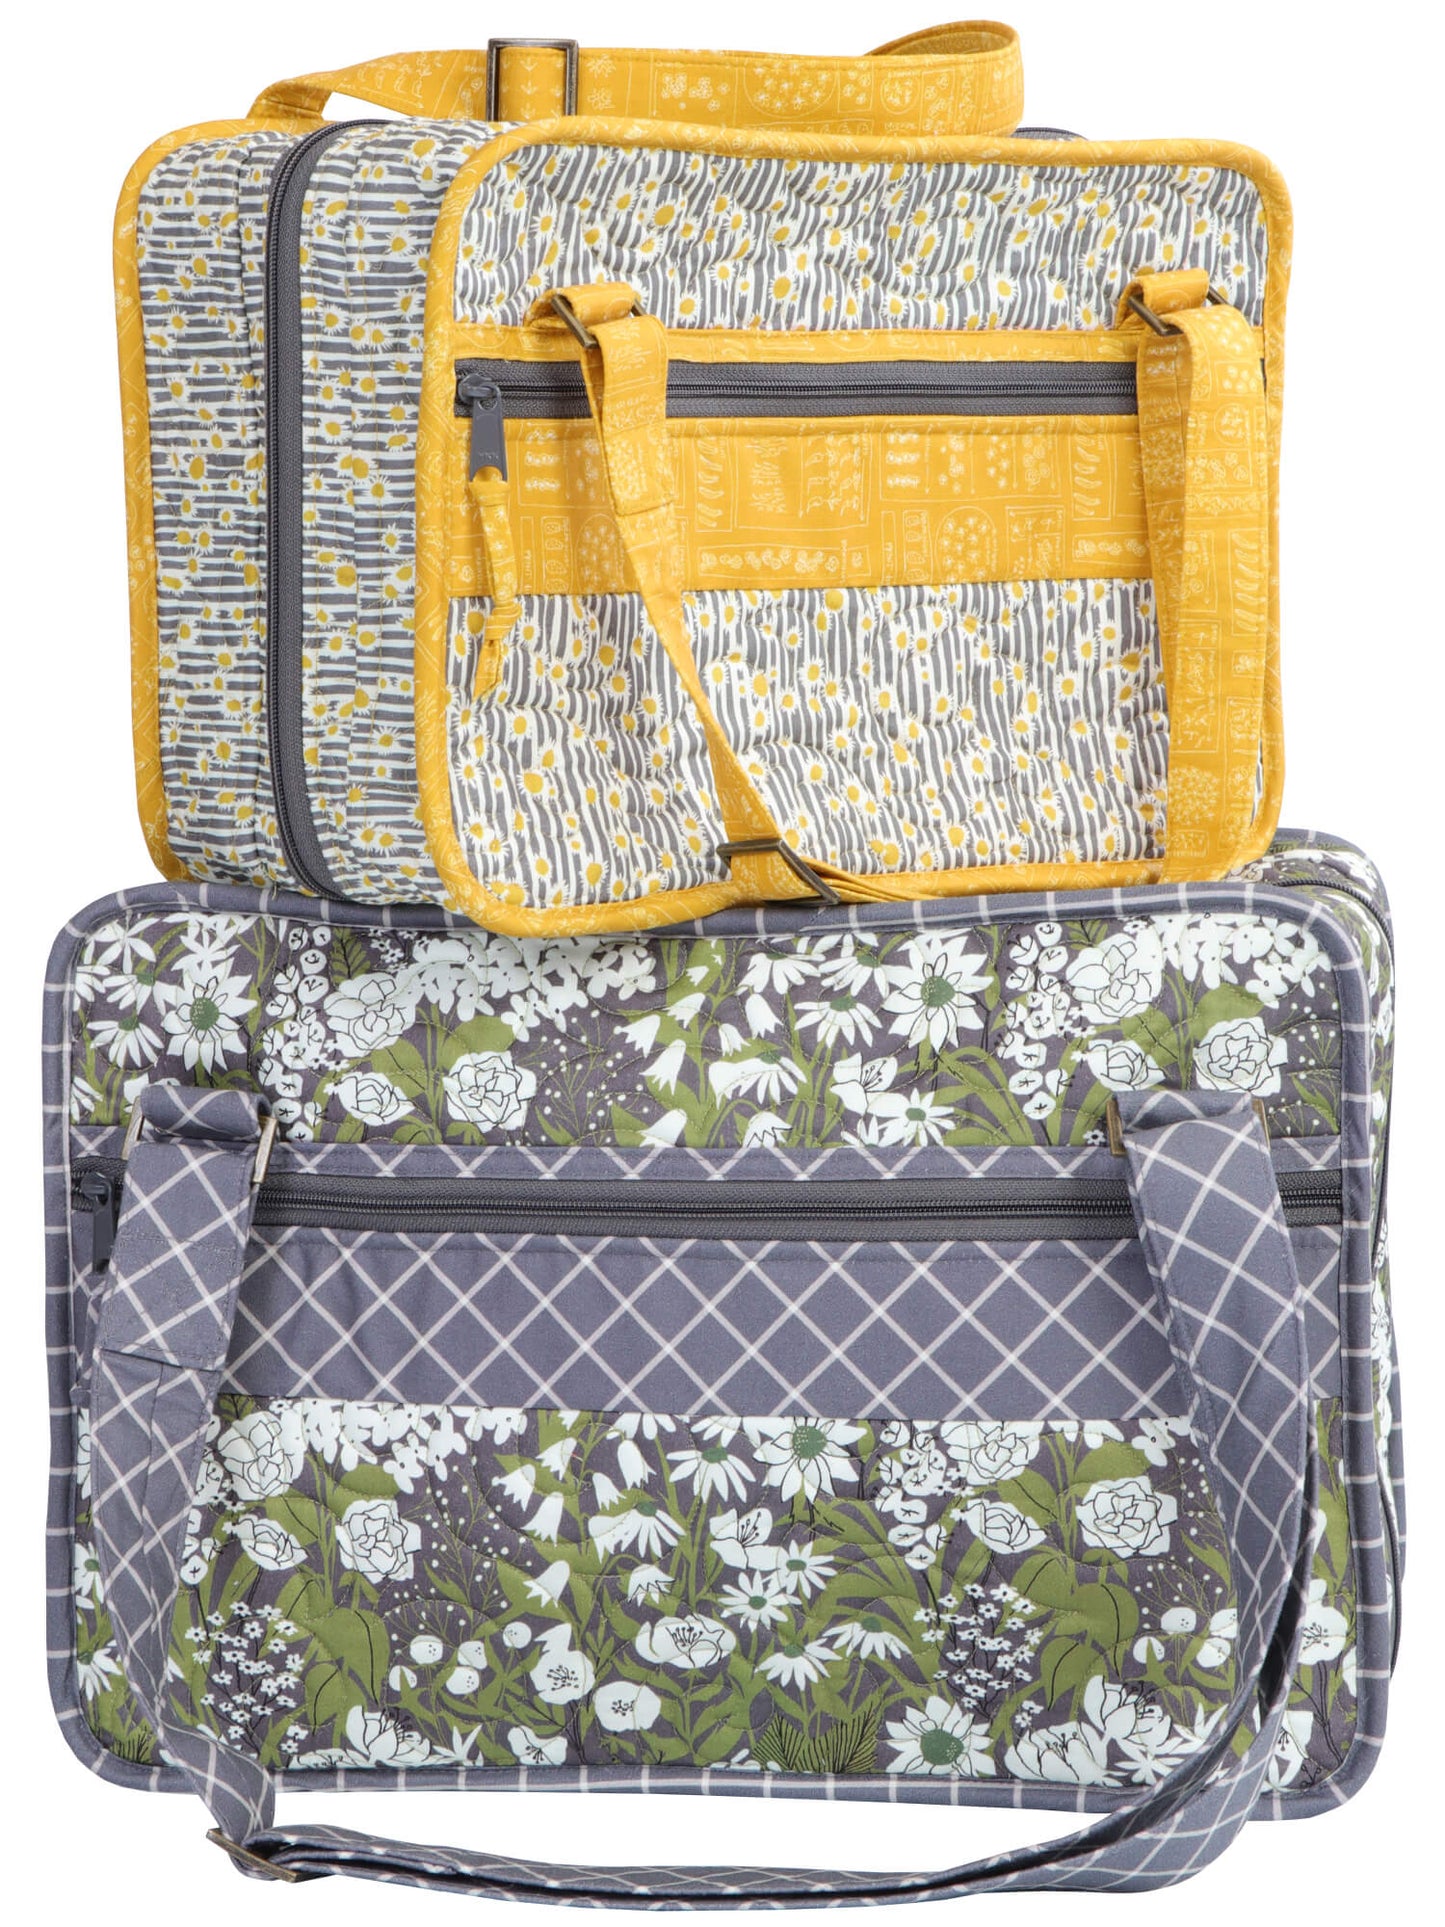 Divide and Conquer - Bags by Annie pattern